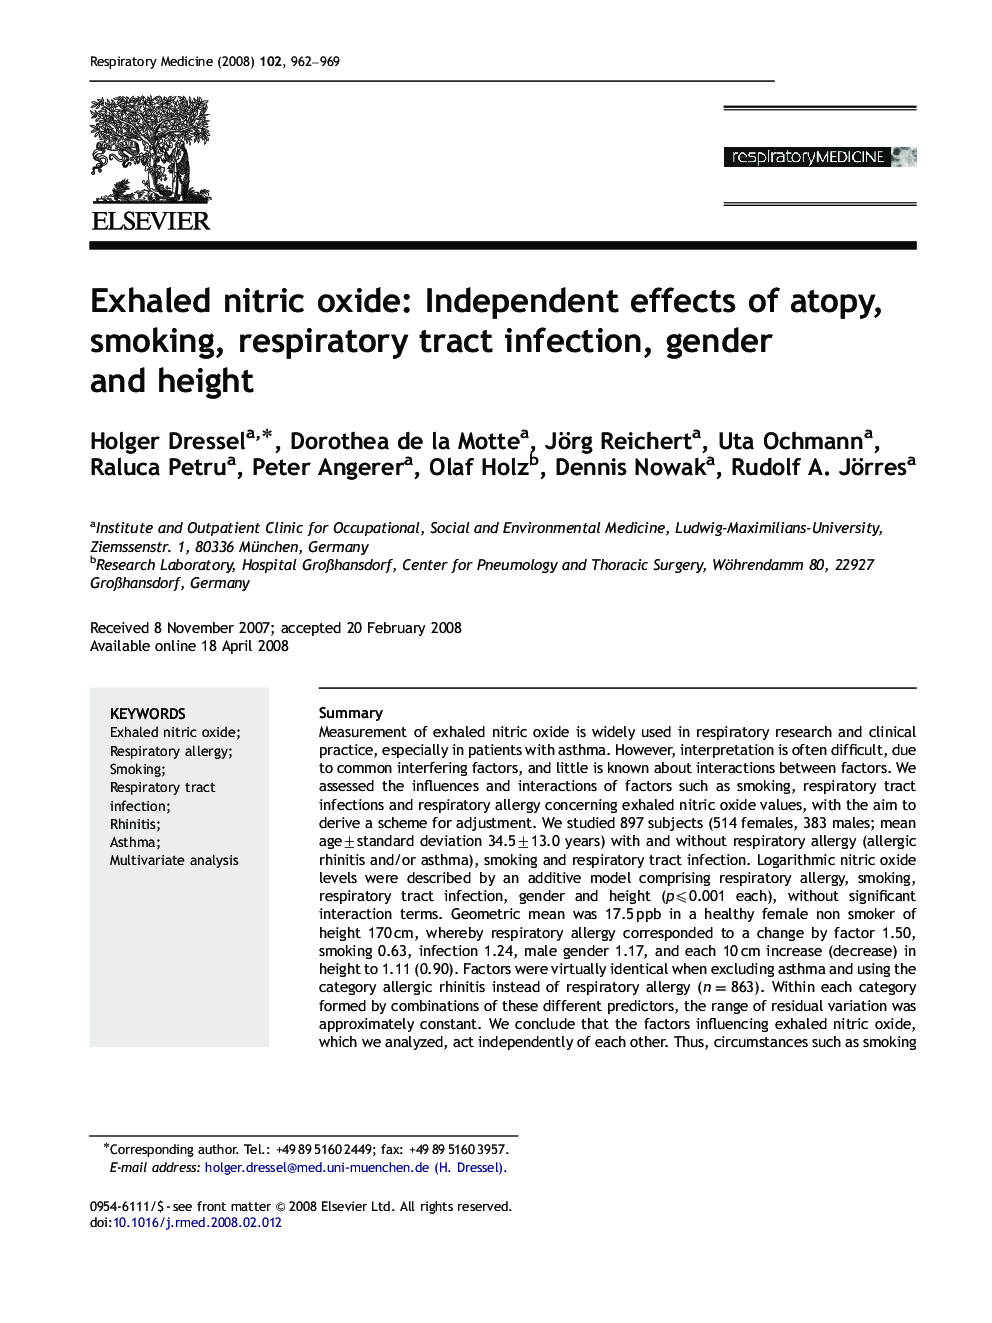 Exhaled nitric oxide: Independent effects of atopy, smoking, respiratory tract infection, gender and height